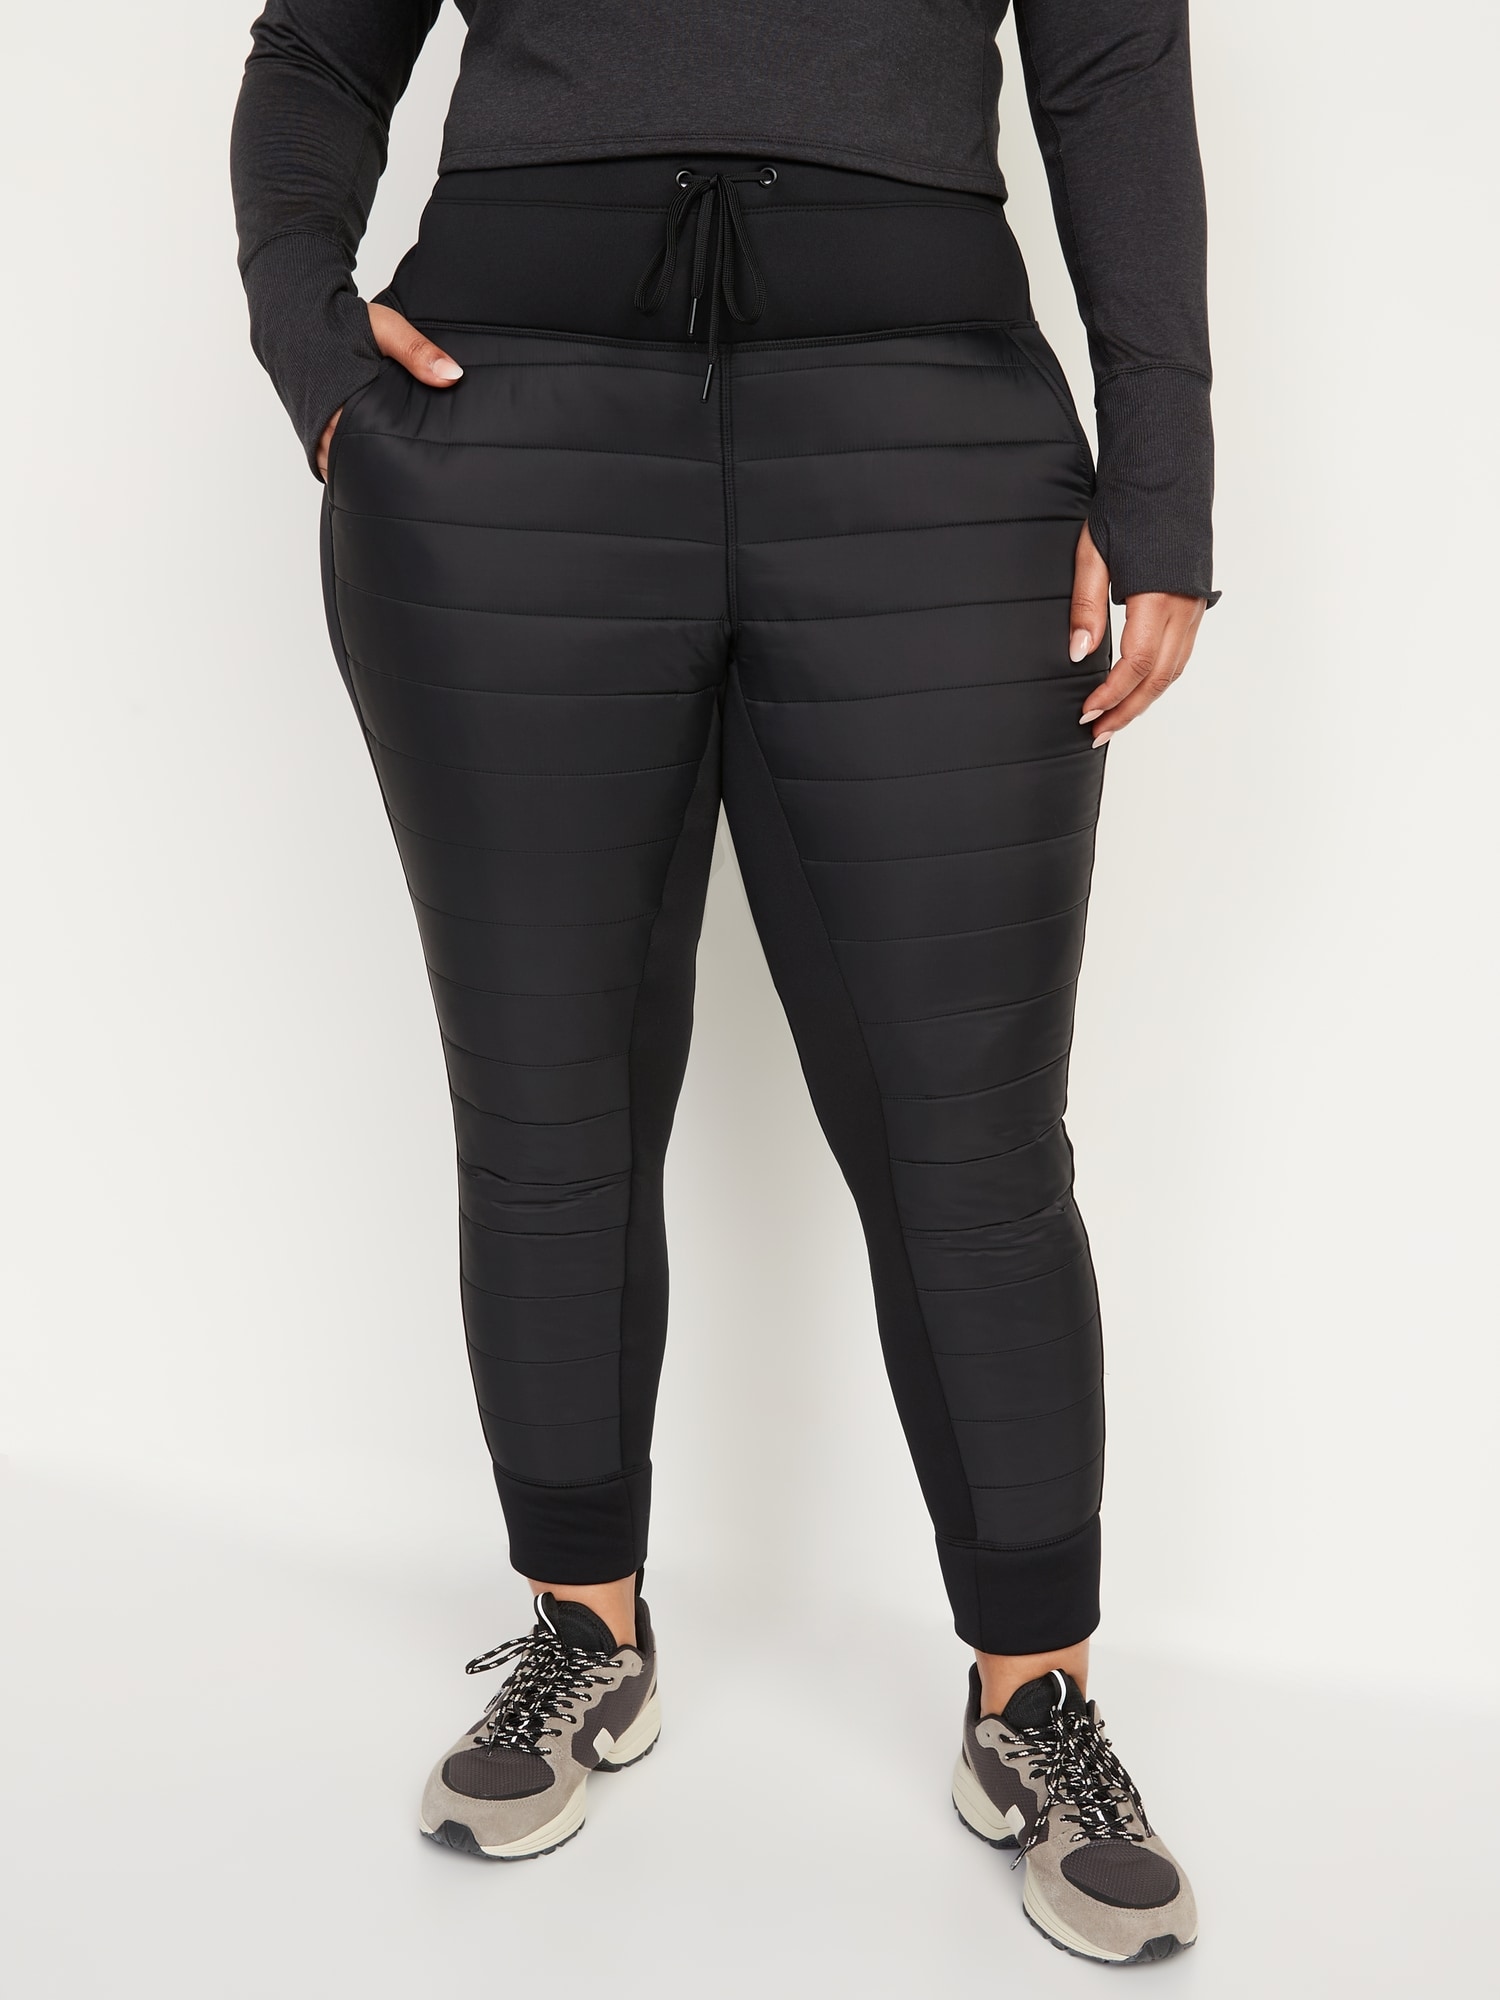 High-Waisted UltraCoze Quilted Hybrid Jogger Leggings for Women